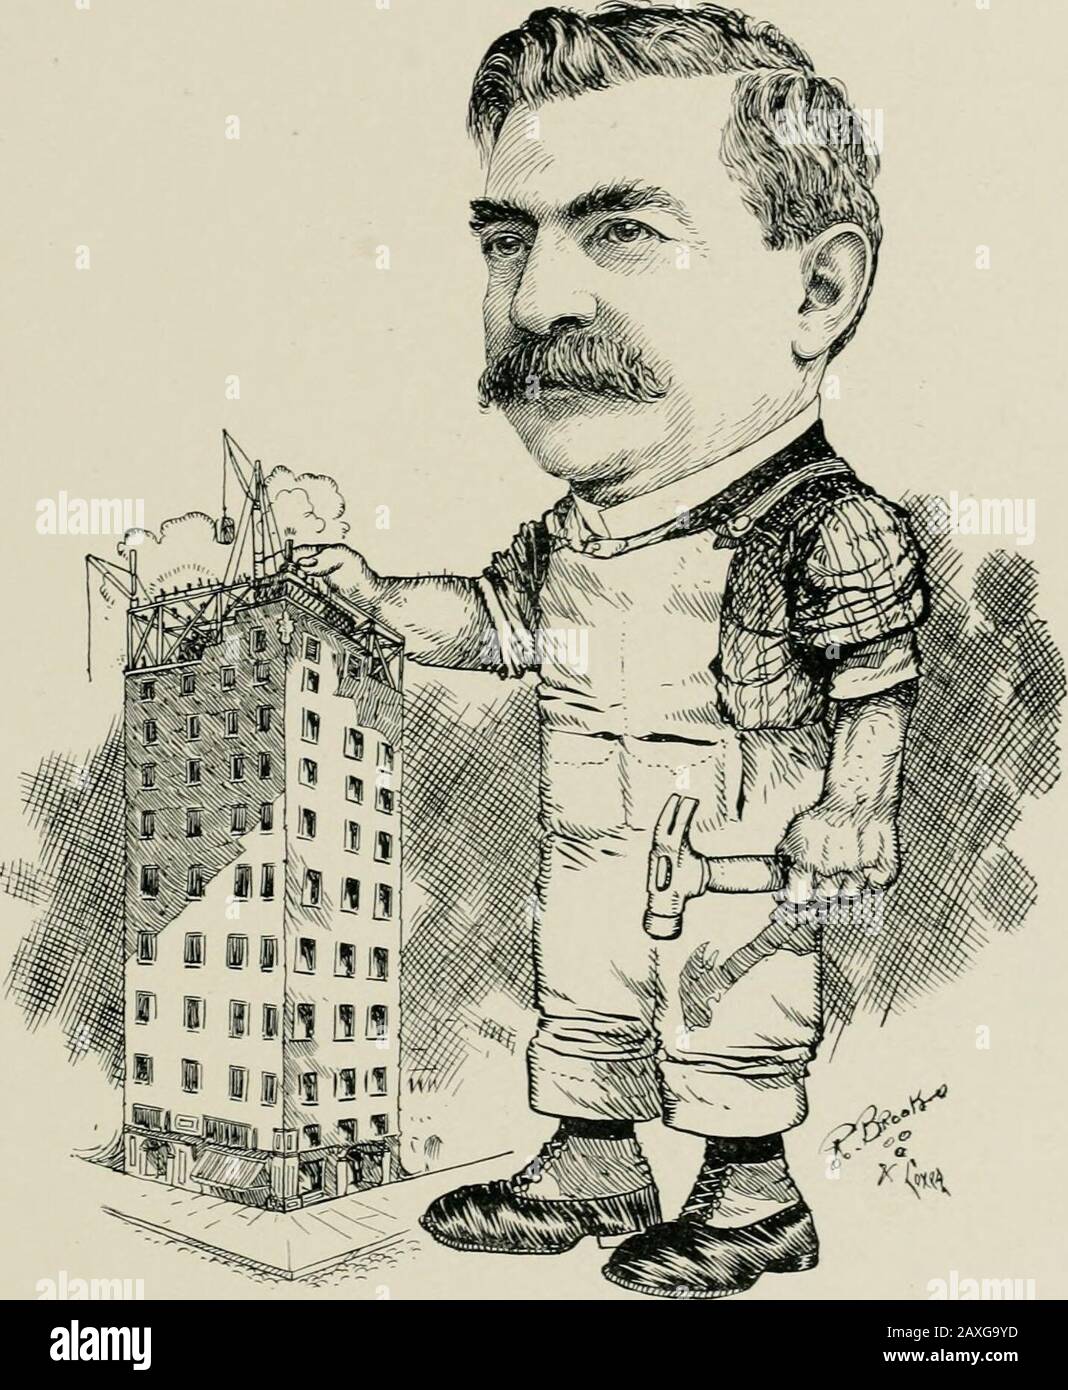 'As we see 'em,' a volume of cartoons and caricatures of Los Angeles citizens . R. H. LACY,Secretary Lacy Manufacturing Co.. J. B. LANKERSHiM.Capitalist. Stock Photo